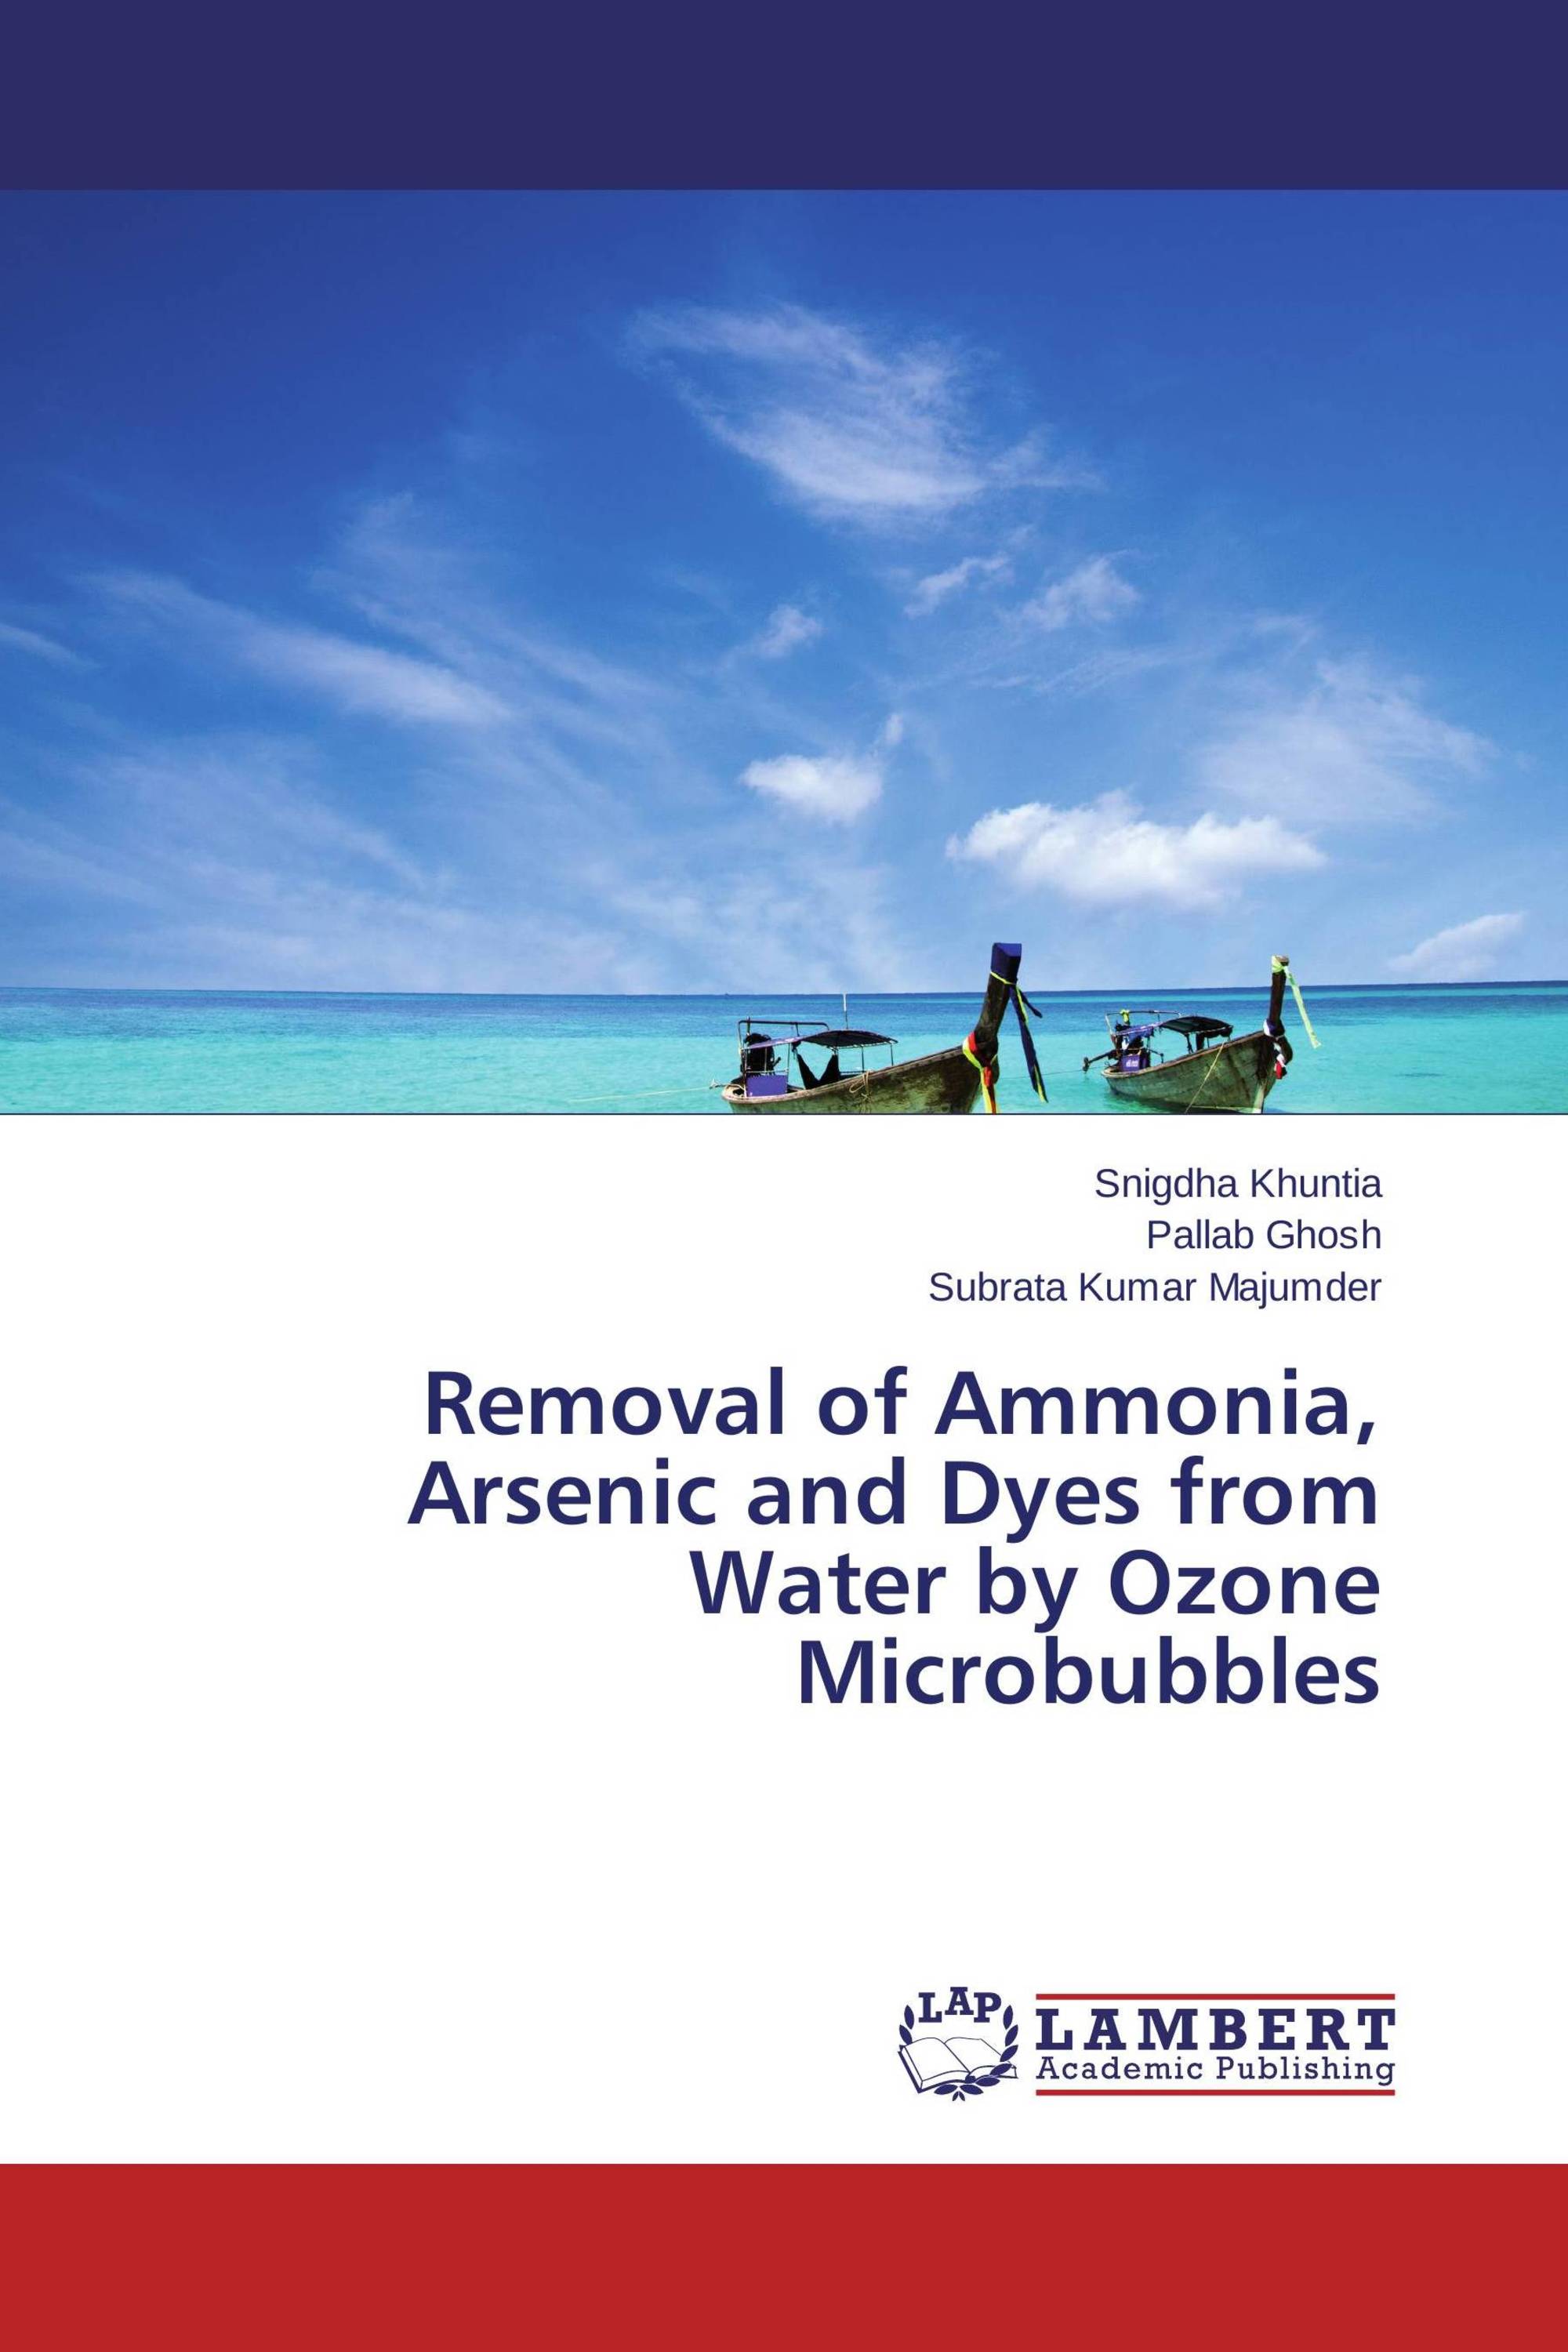 Removal of Ammonia, Arsenic and Dyes from Water by Ozone Microbubbles